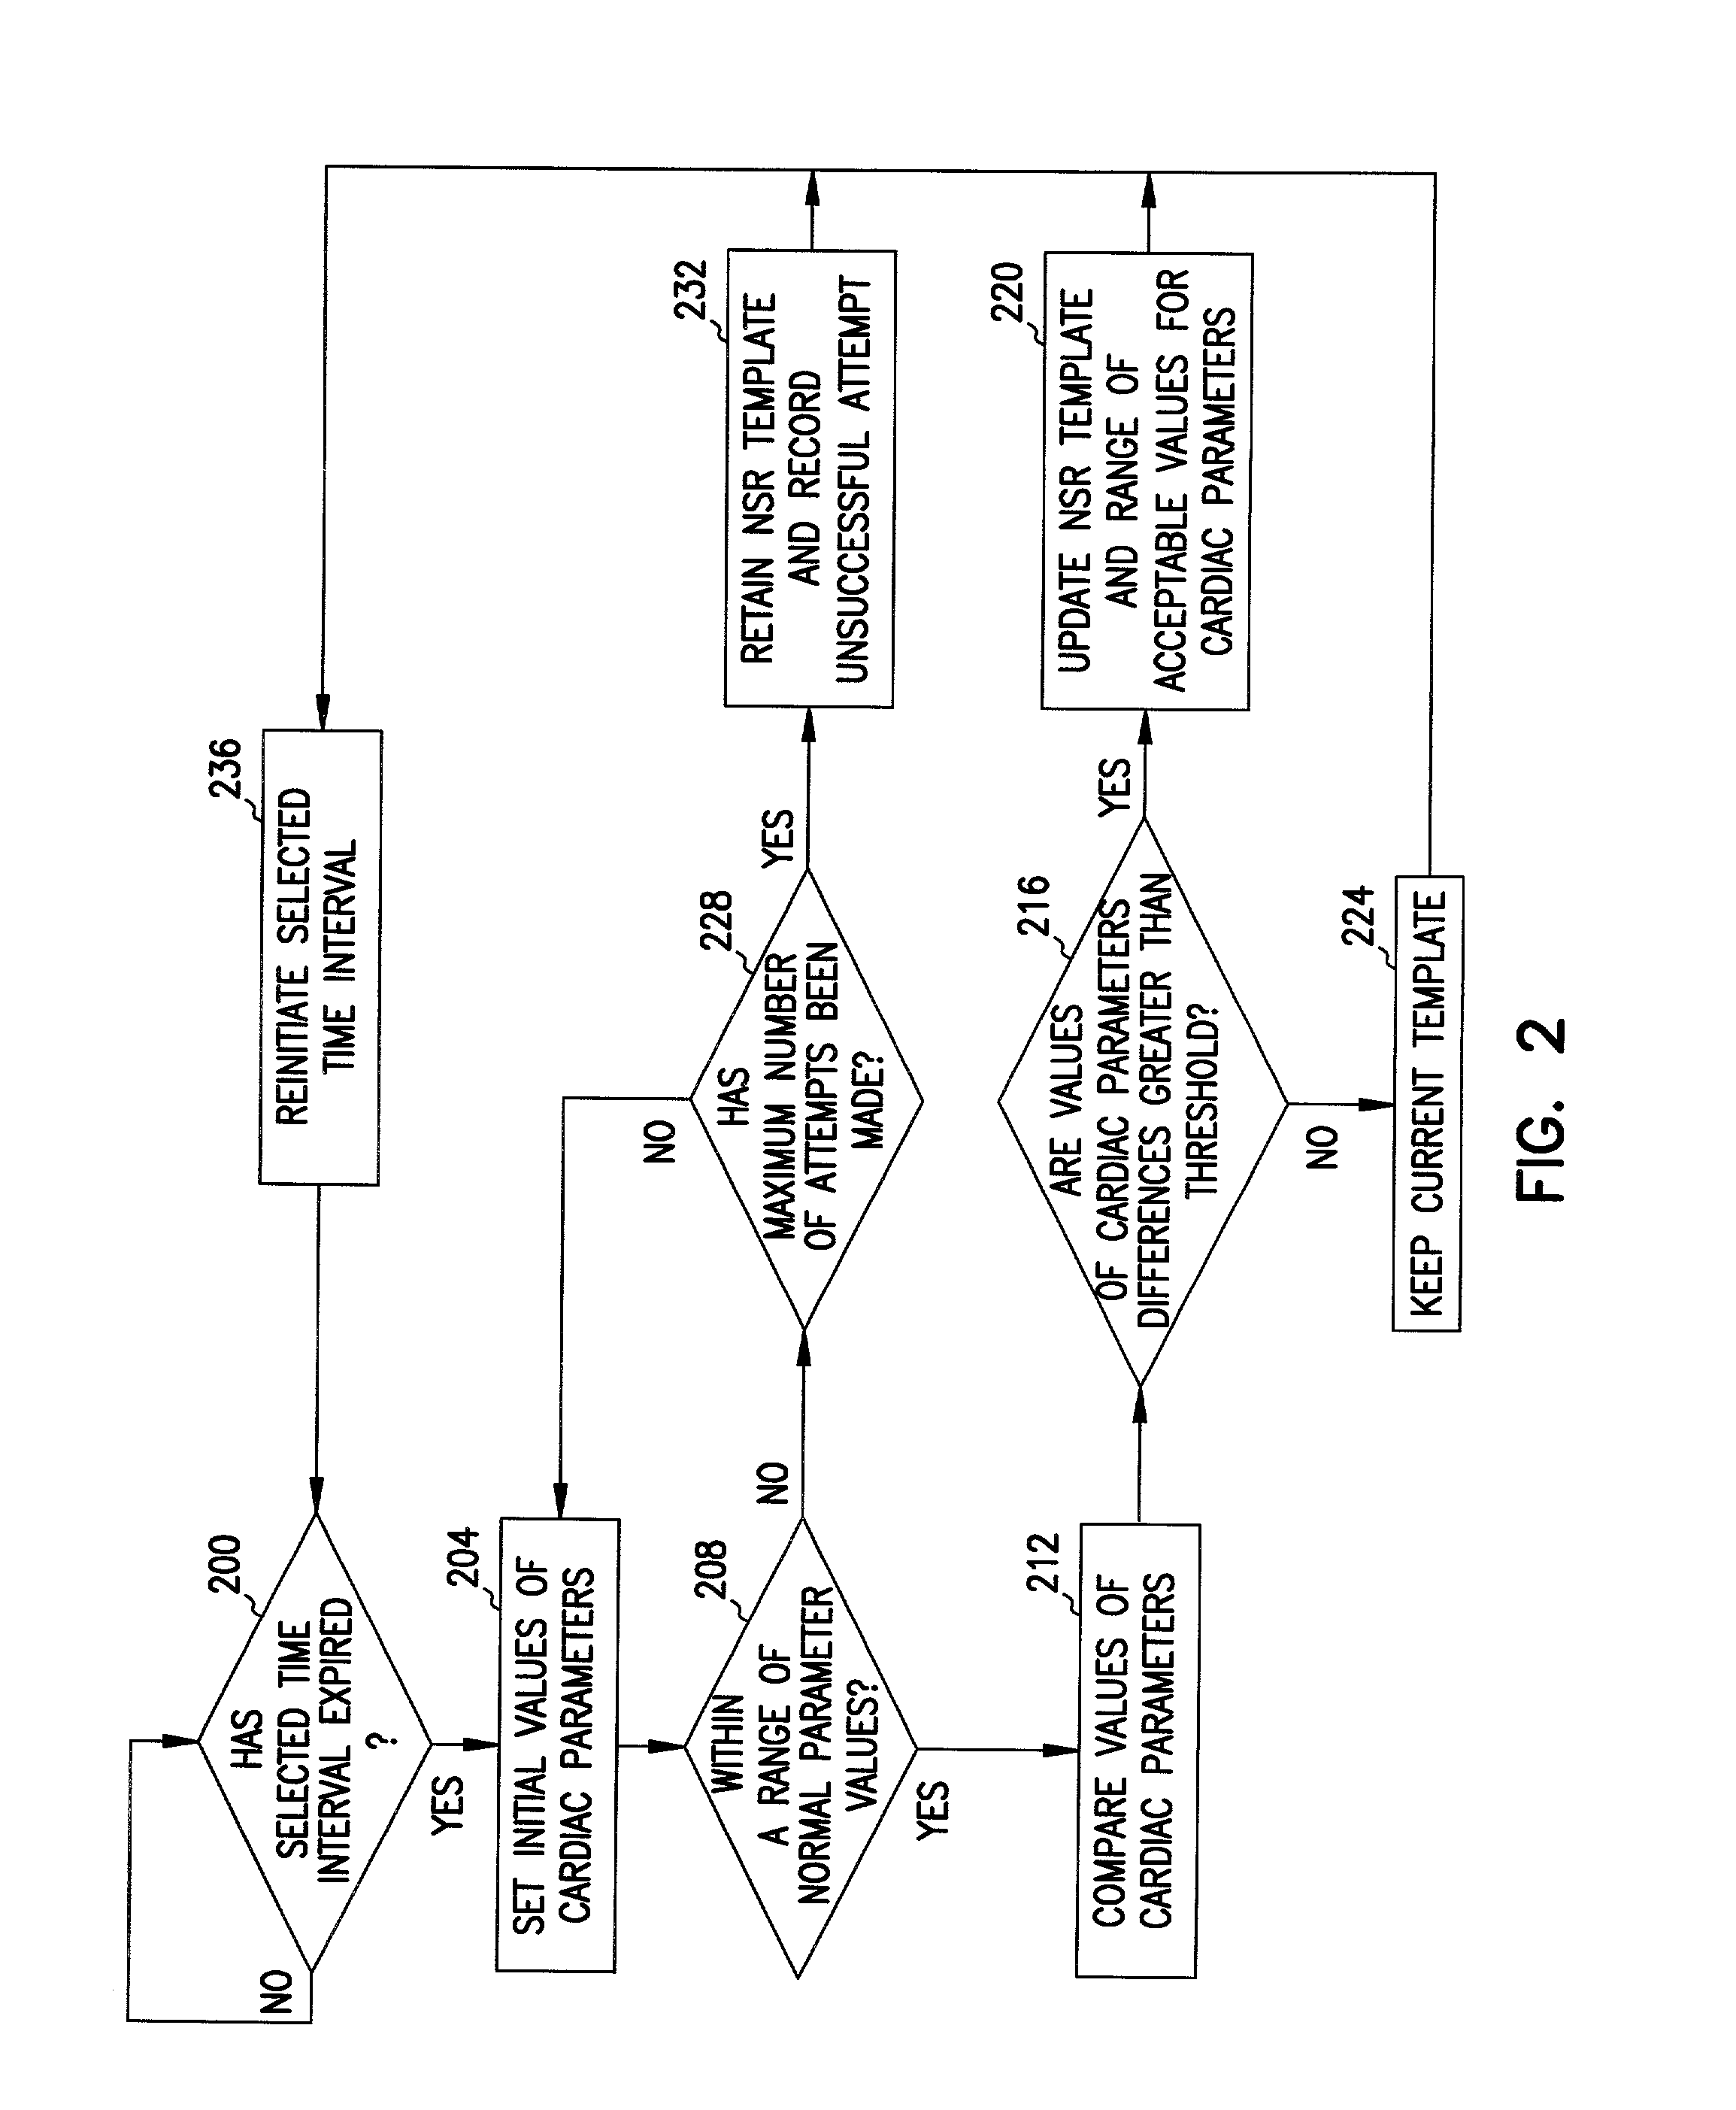 Method and system for verifying the integrity of normal sinus rhythm templates